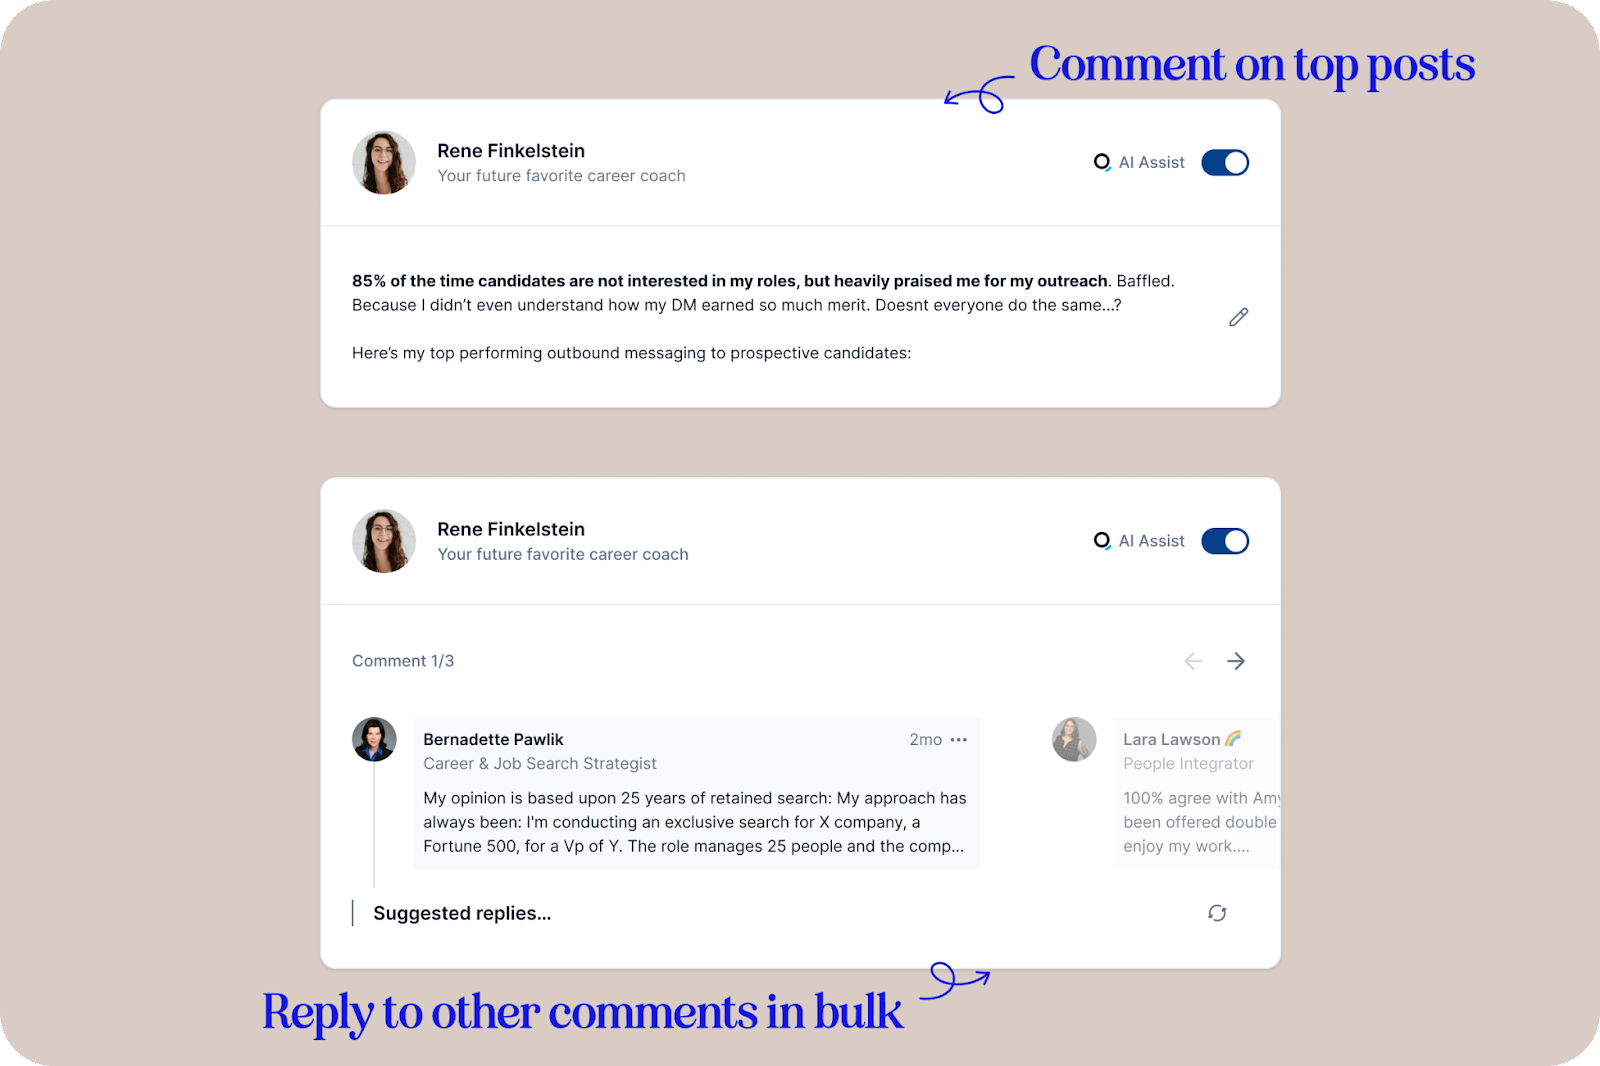 A screenshot of Queue's interface displaying the 'Comment on top posts' feature with two posts from Rene Finkelstein, a career coach, and the option to enable 'AI Assist' for crafting responses, as well as a section to 'Reply to other comments in bulk' with AI suggested replies.